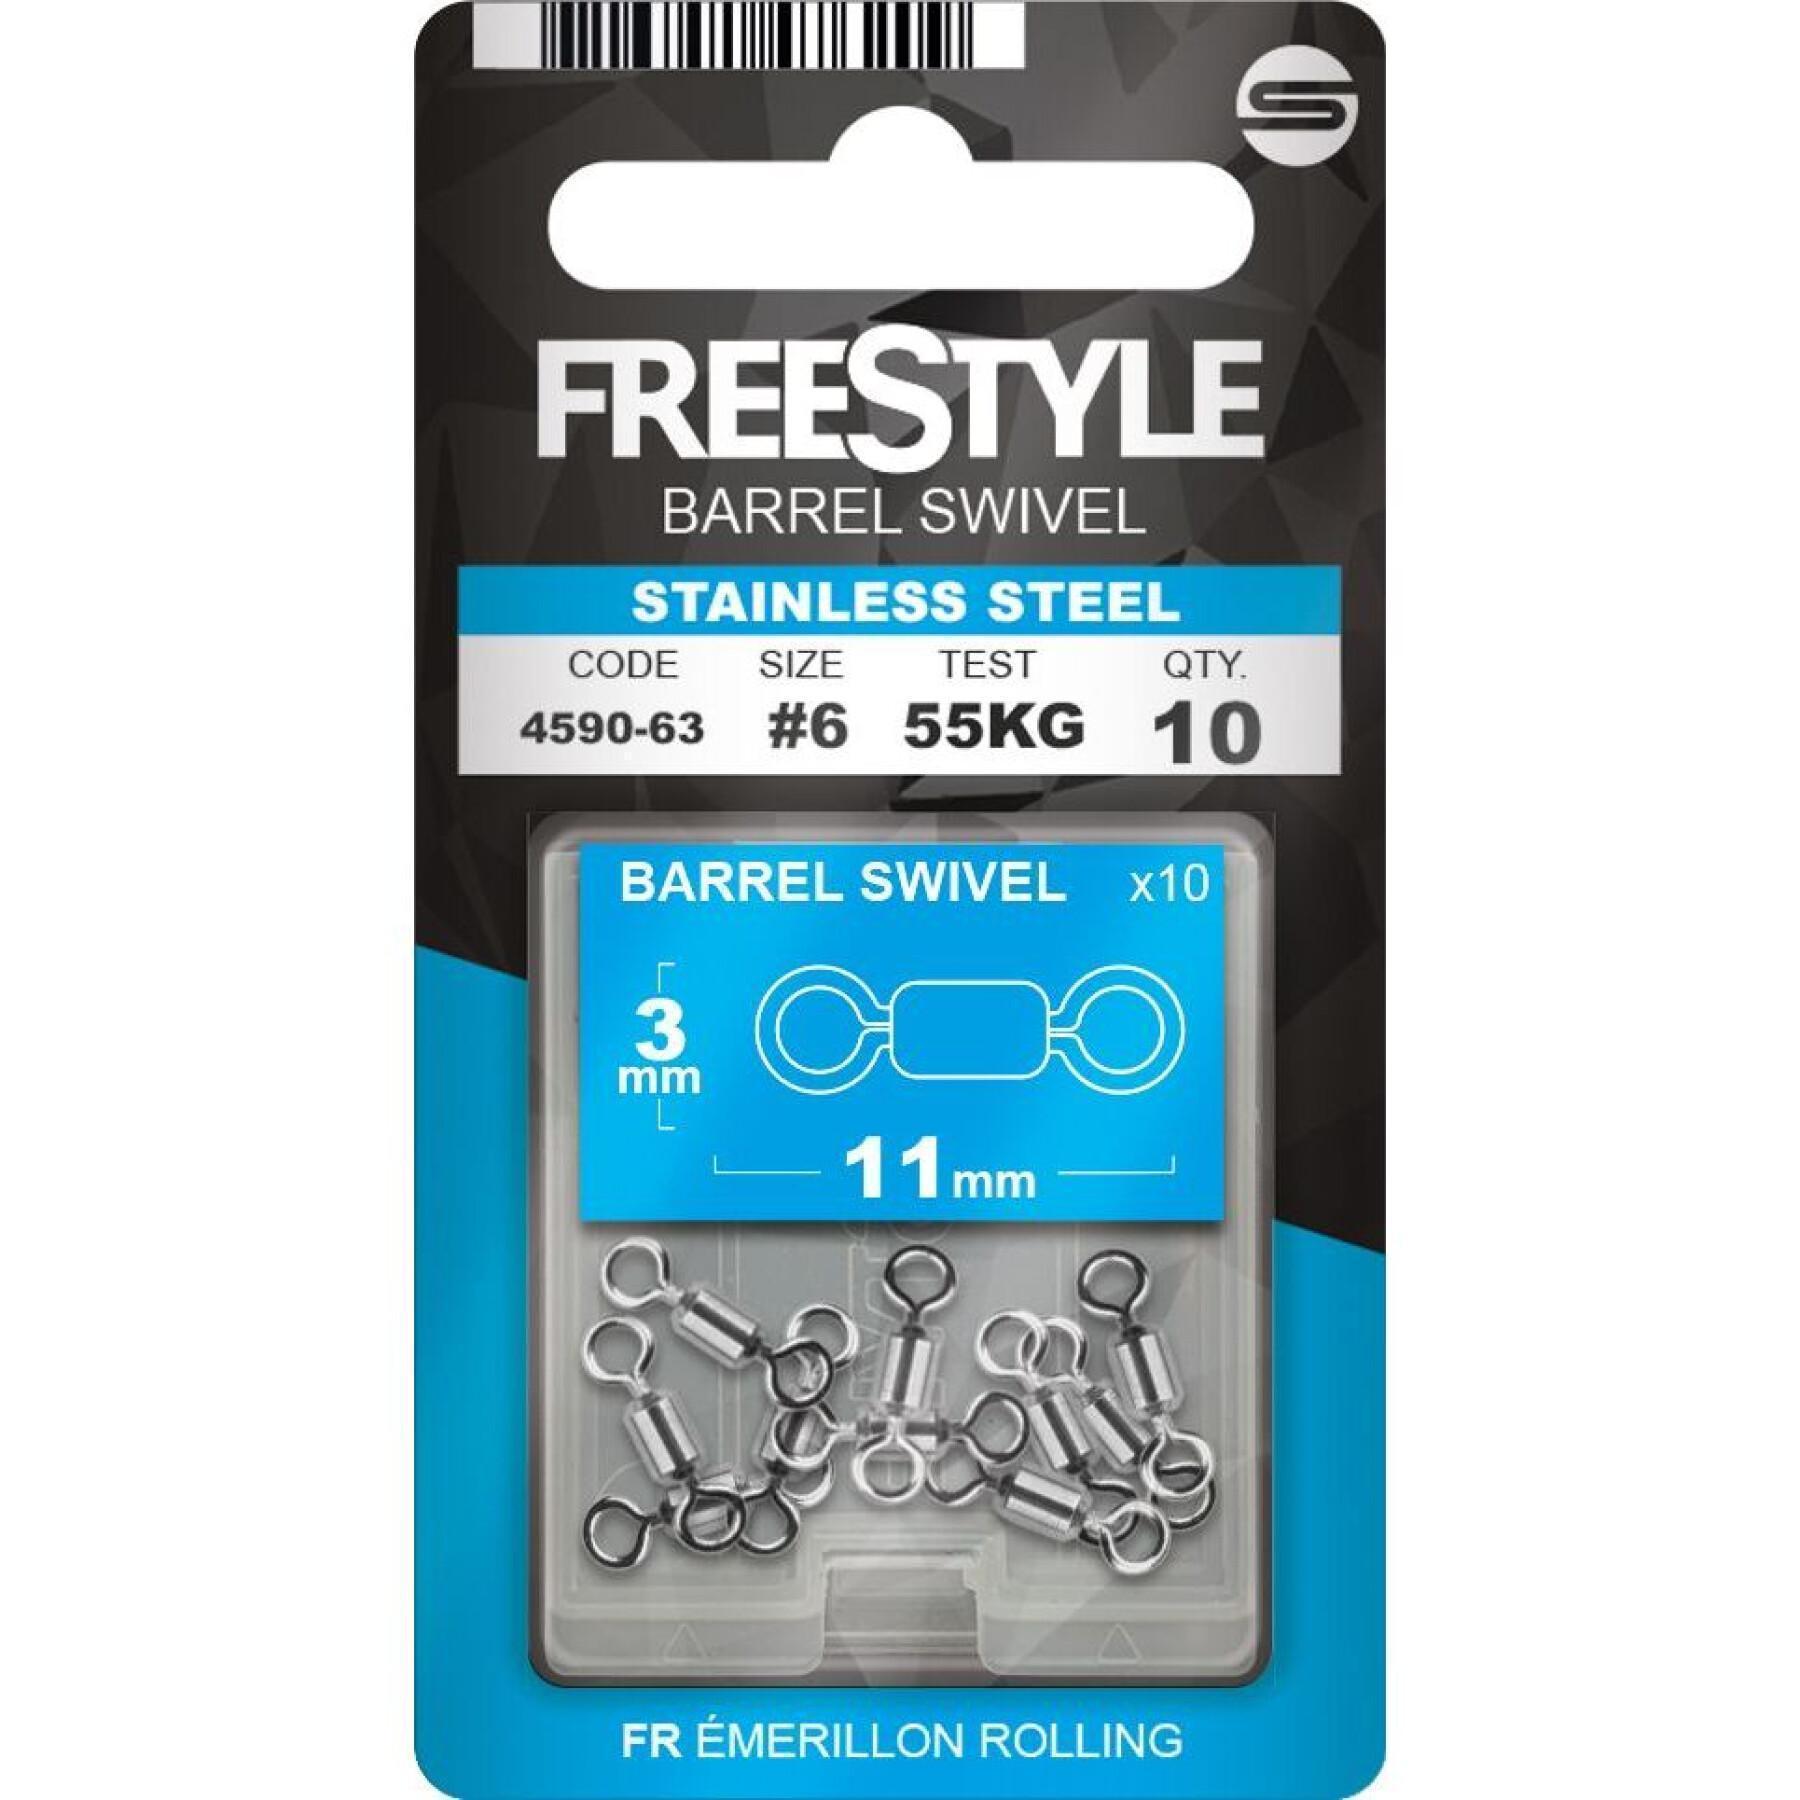 Pack of 10 stainless steel carnivore swivels Freestyle Reload 11 mm